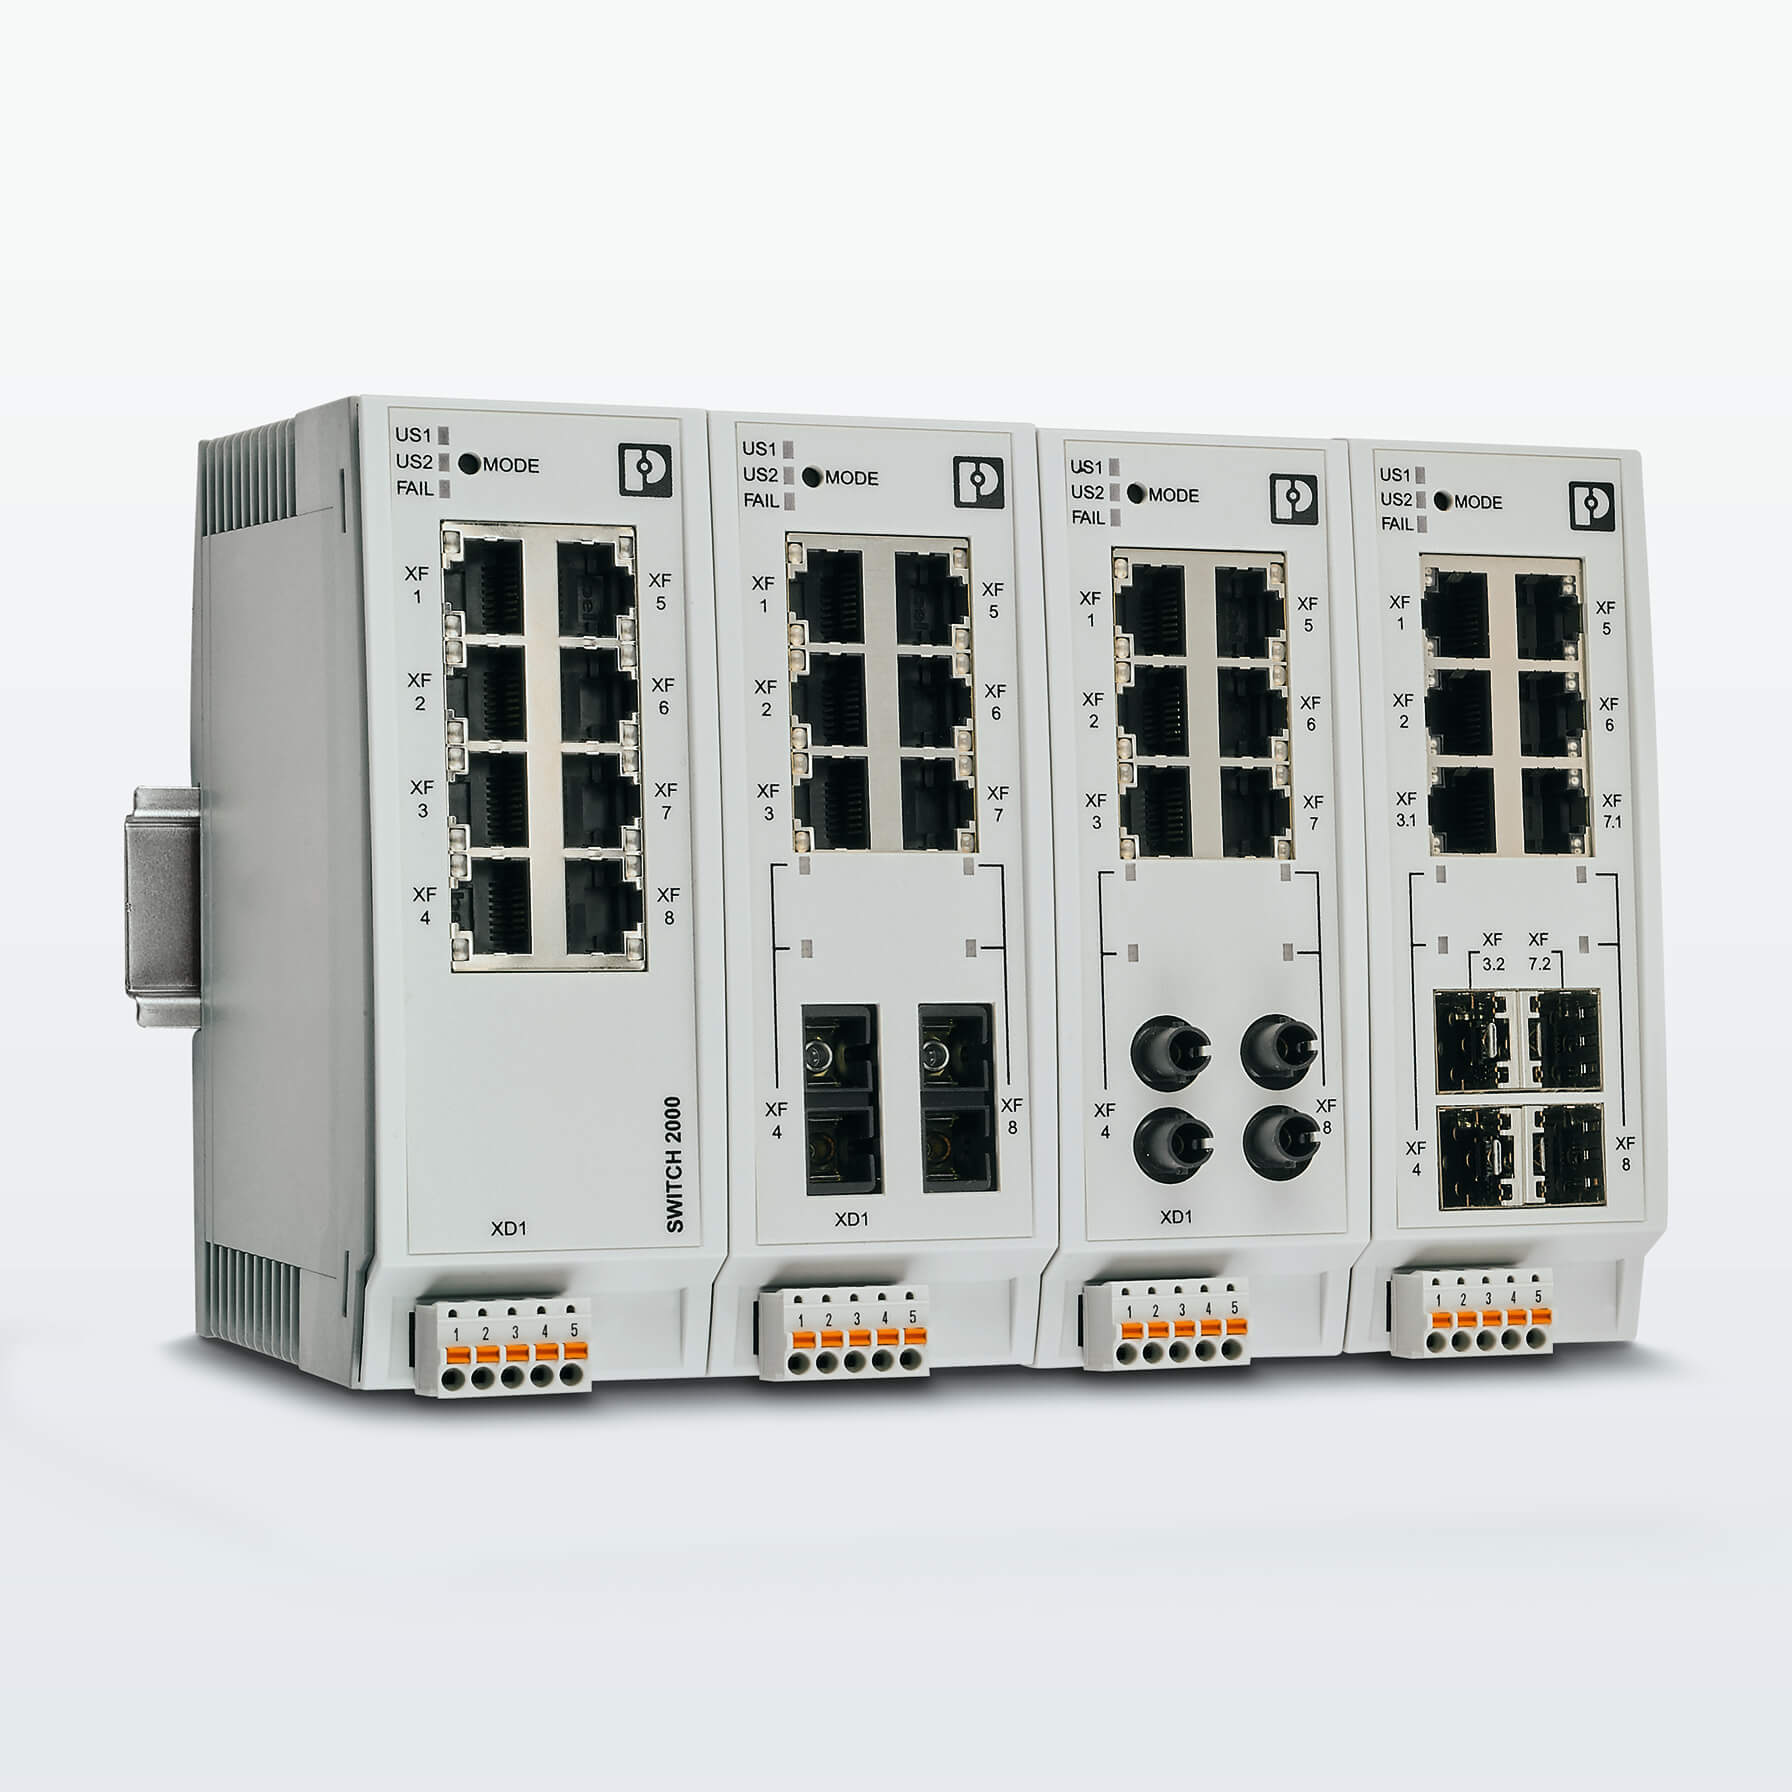 The 2200/2300 series is designed for complex automation